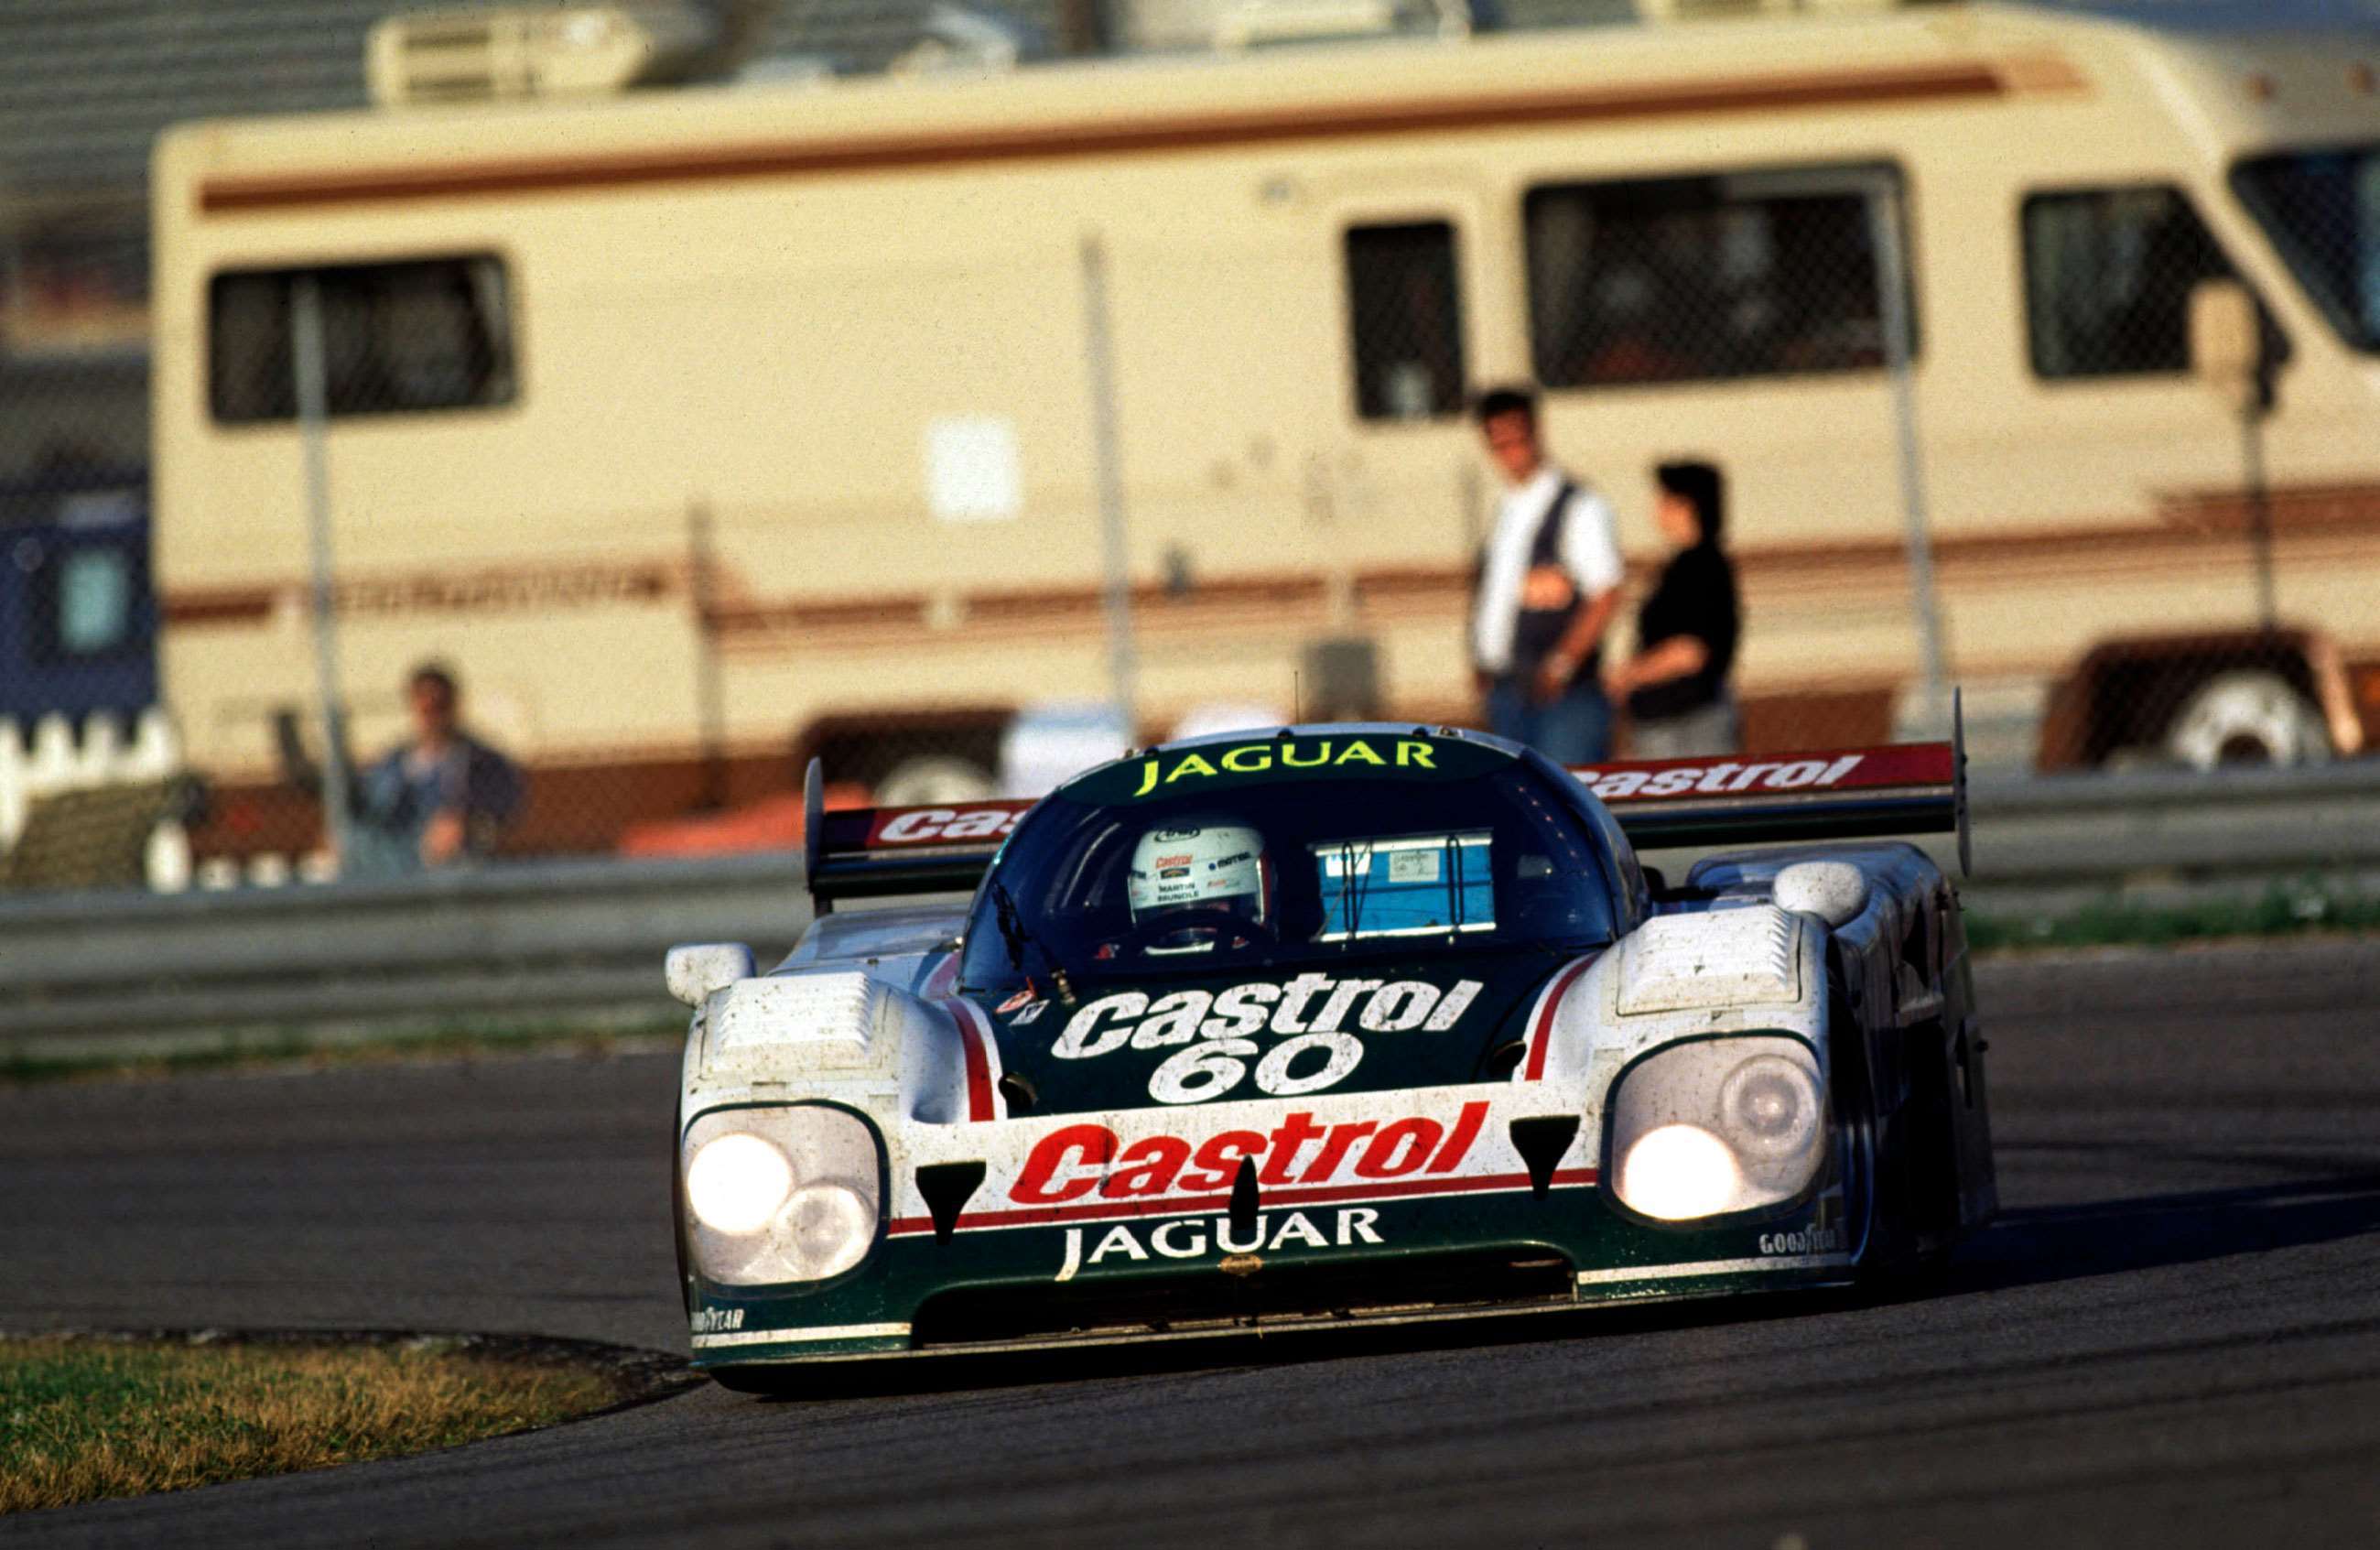 Brundle made a return to the Daytona 24 Hours in 1990, this time at the wheel of the TWR Jaguar XJR-12 (pictured). Brundle, with team-mates Price Cobb and John Neilsen, finished in second position behind the XJR-12 of Jan Lammers, Davy Jones and Andy Wallace. 